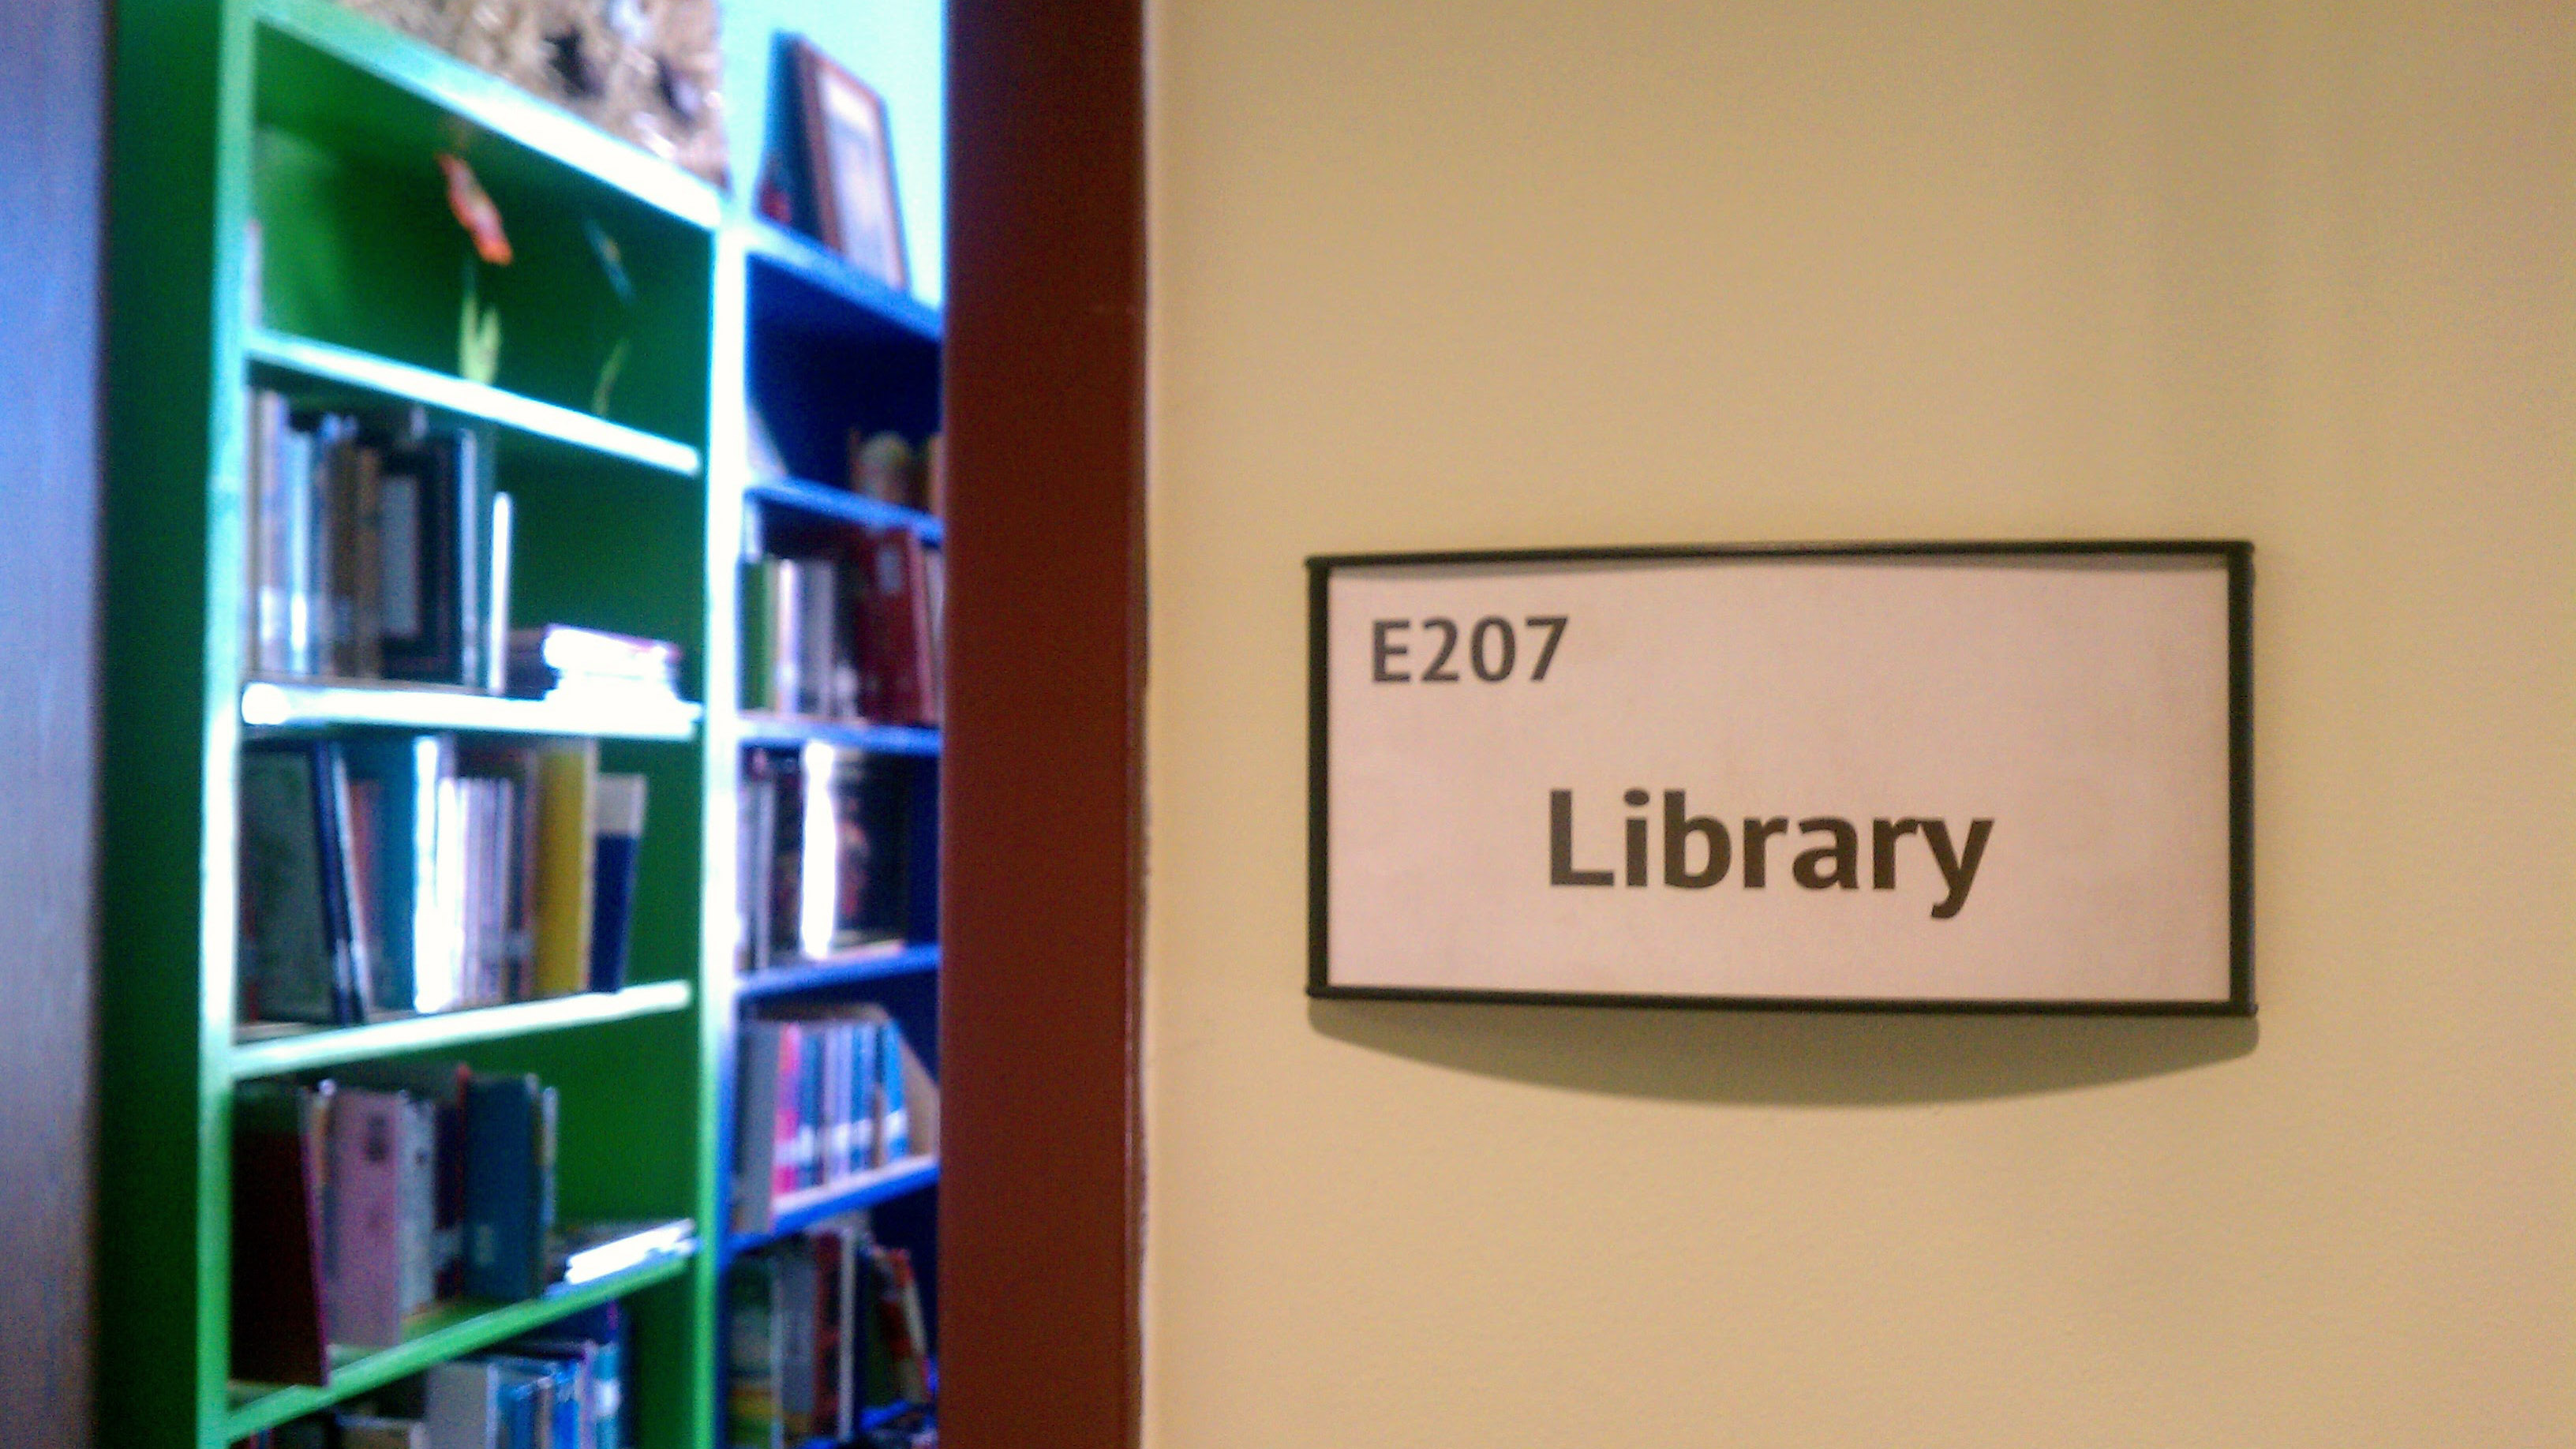 Library Vista System signage by signgeek 